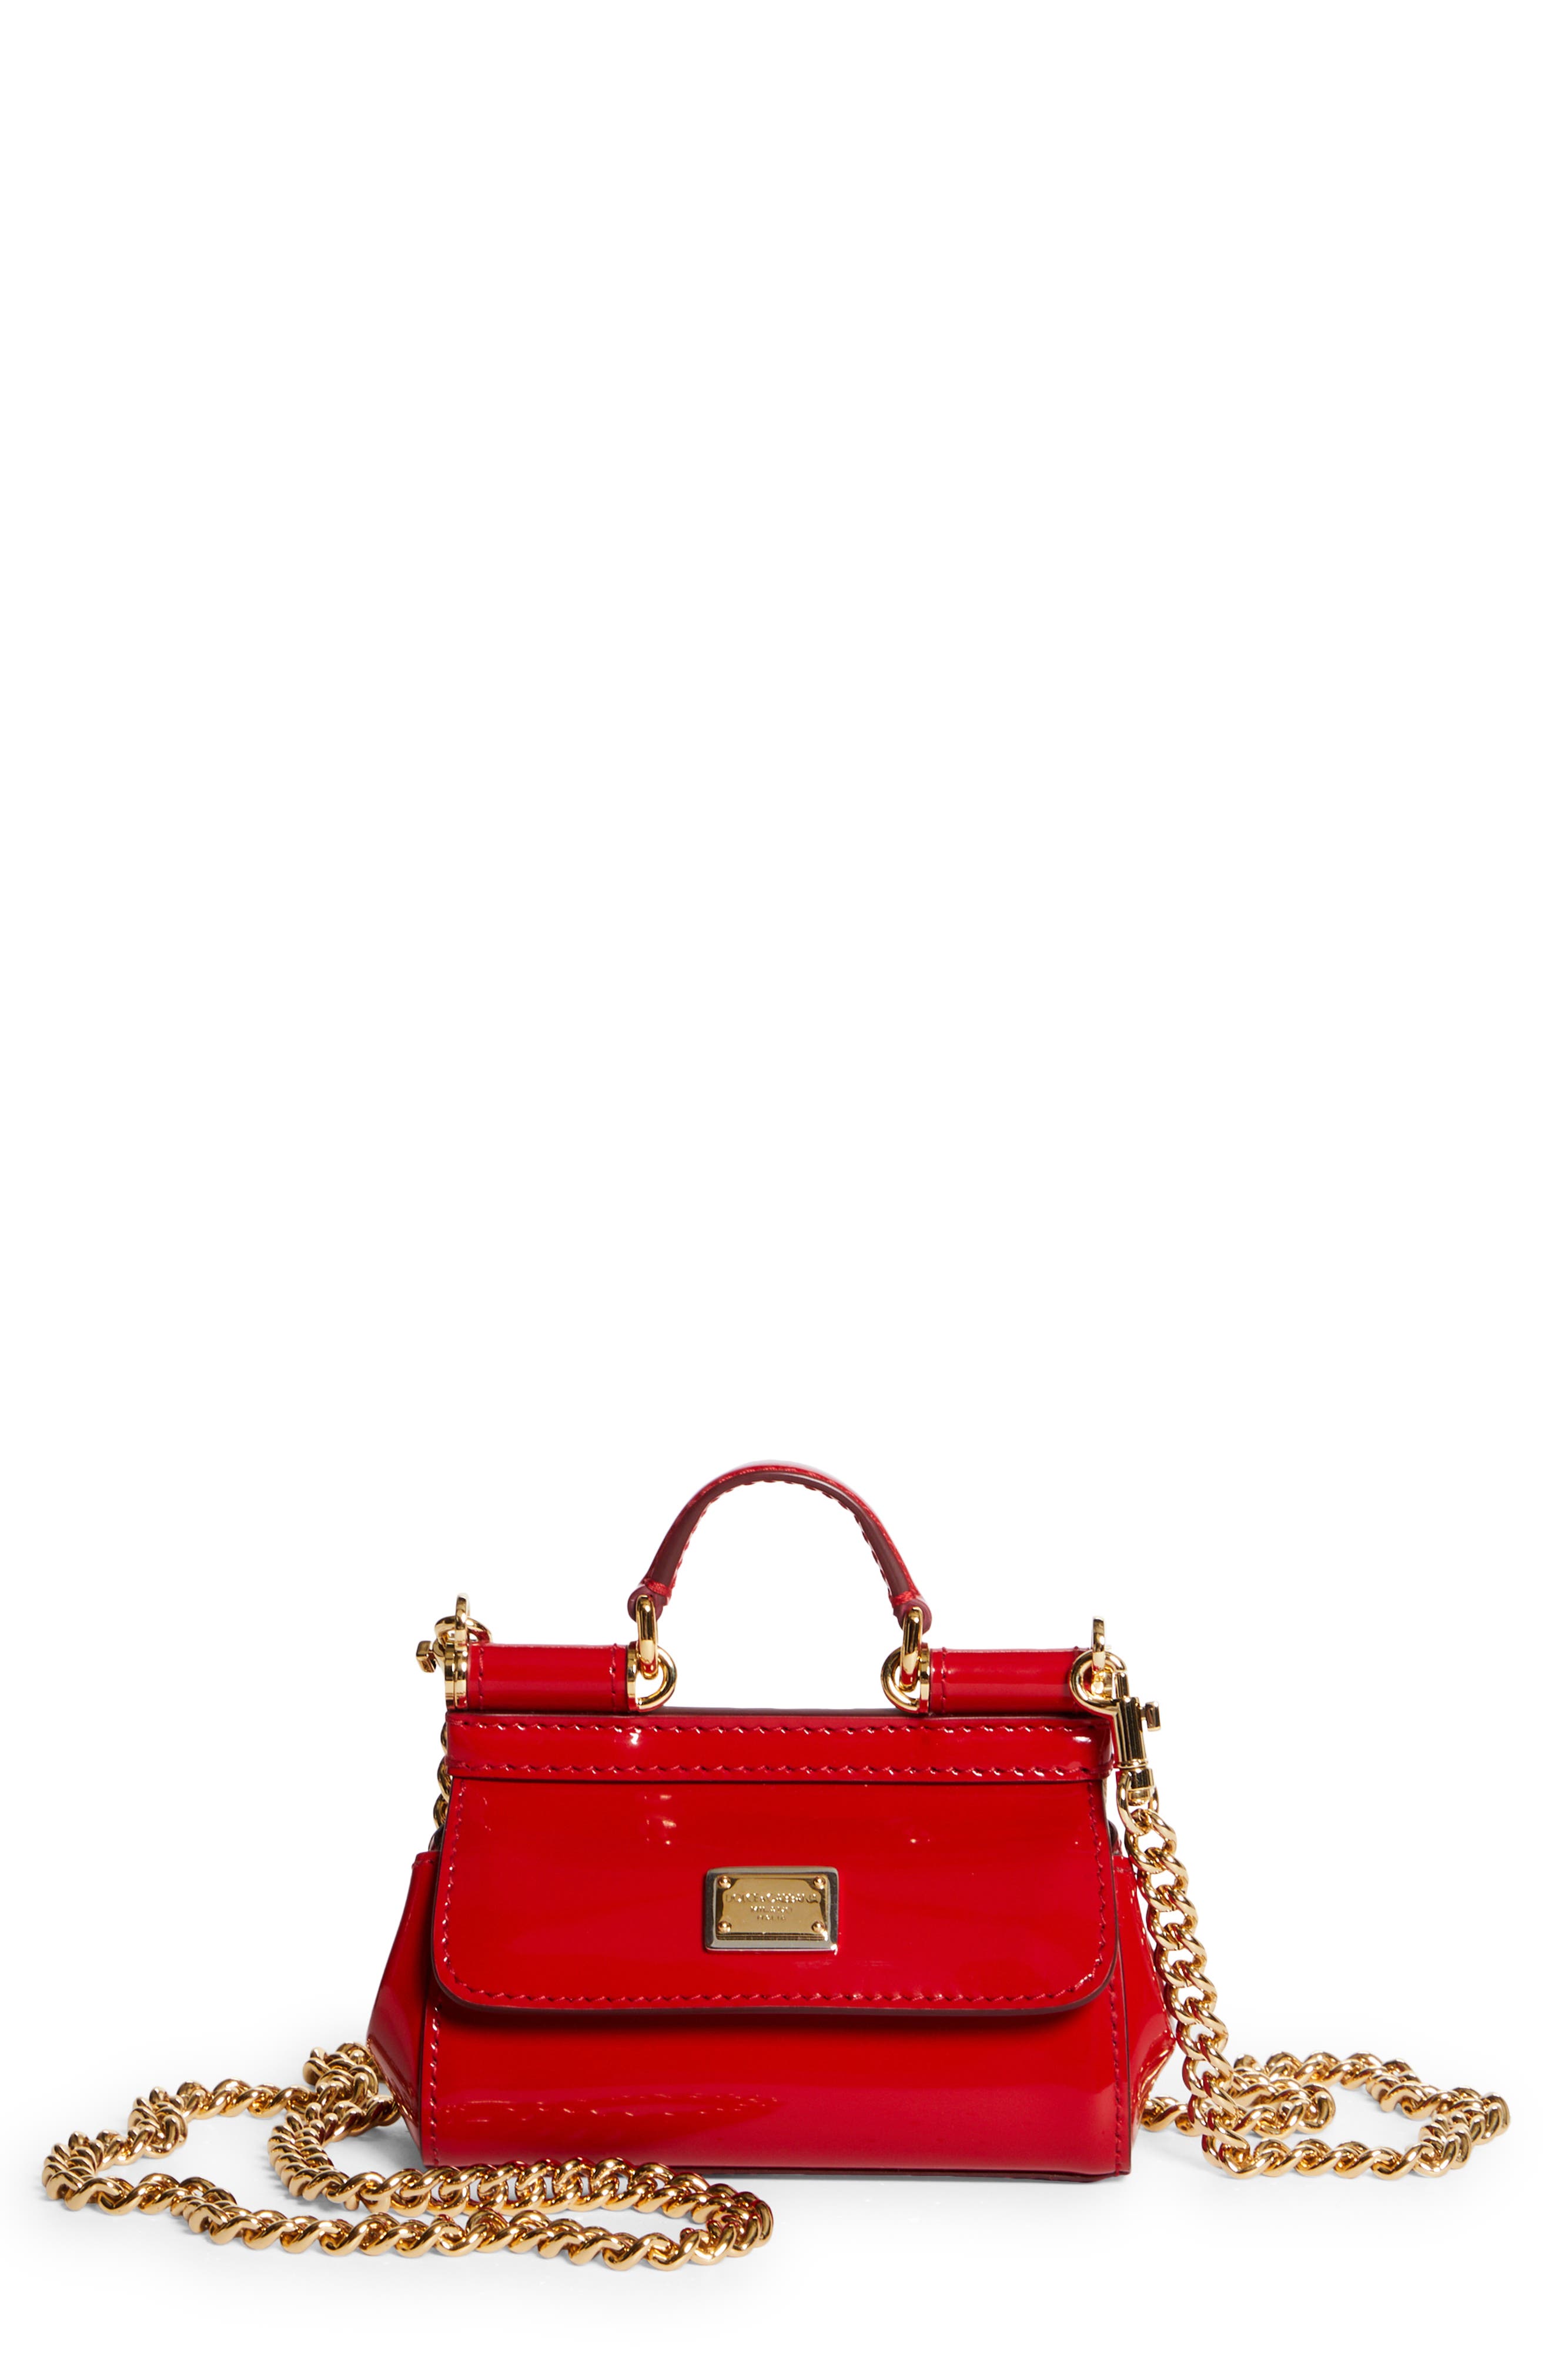 Dolce & Gabbana Mini Sicily Leather Top Handle Bag in Rosso Intenso